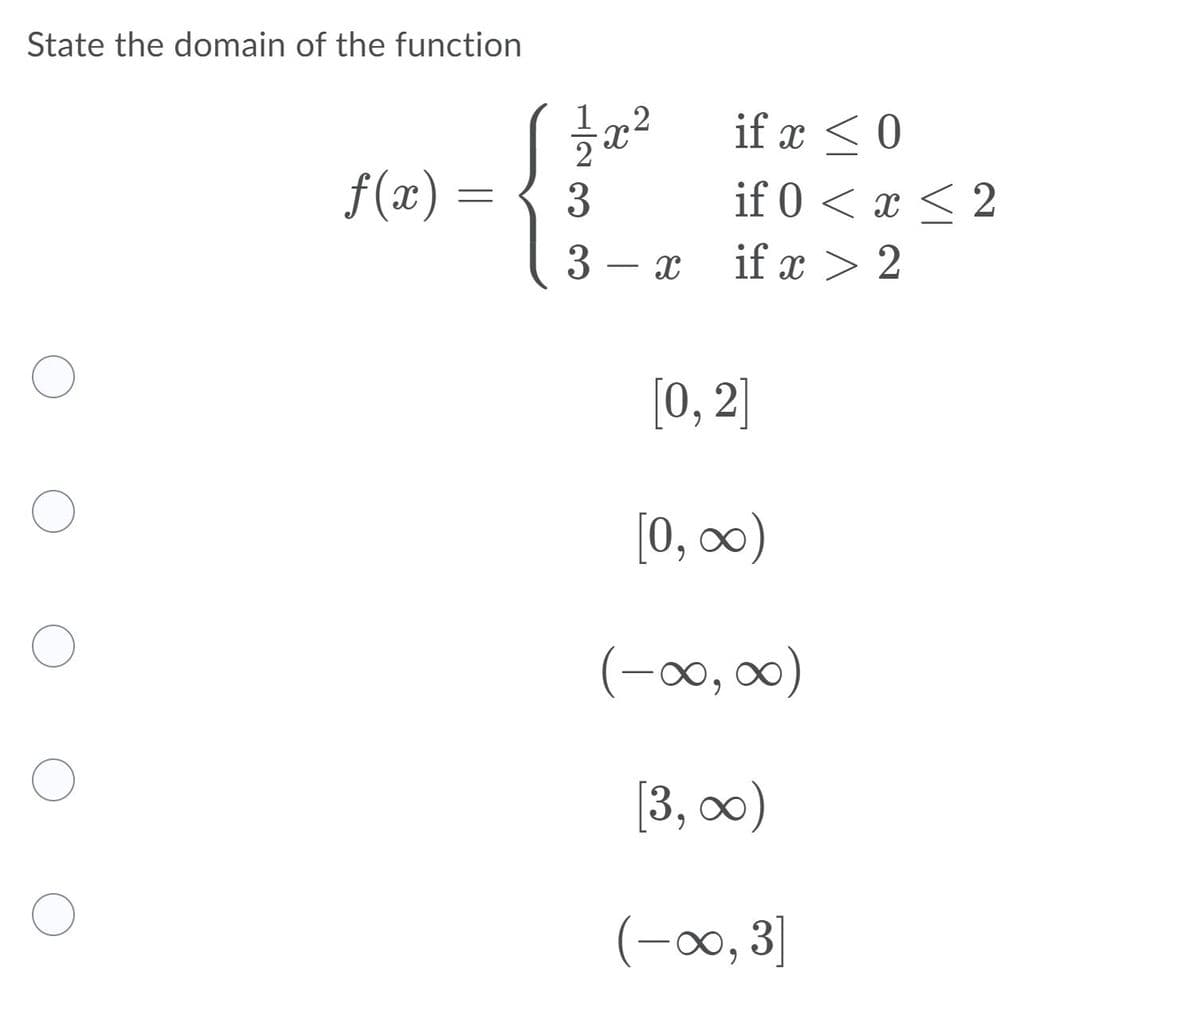 State the domain of the function
,2
if x <0
f (x)
if 0 < x < 2
– x
if x > 2
-
[0, 2]
[0, ∞)
(-00, 00)
[3, о0)
(-00, 3]
1/2 3 3
